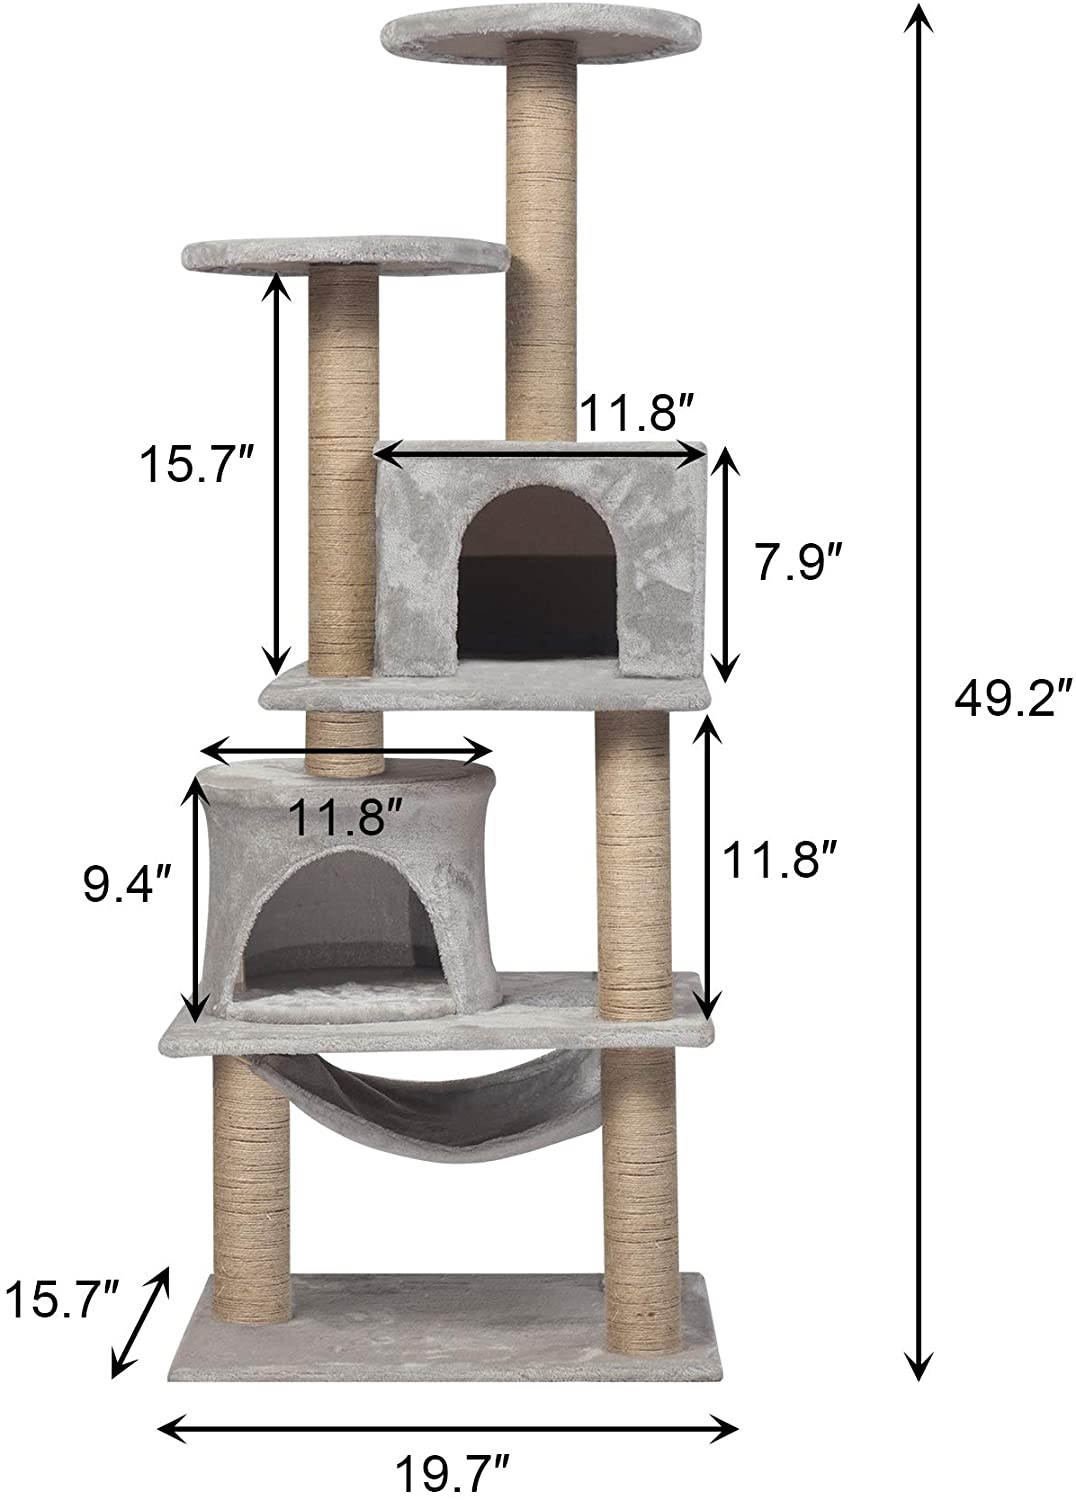 Condo Pet Furniture Multi-Level Kitten Activity Tower Play House with Sisal Scratching Posts Perch